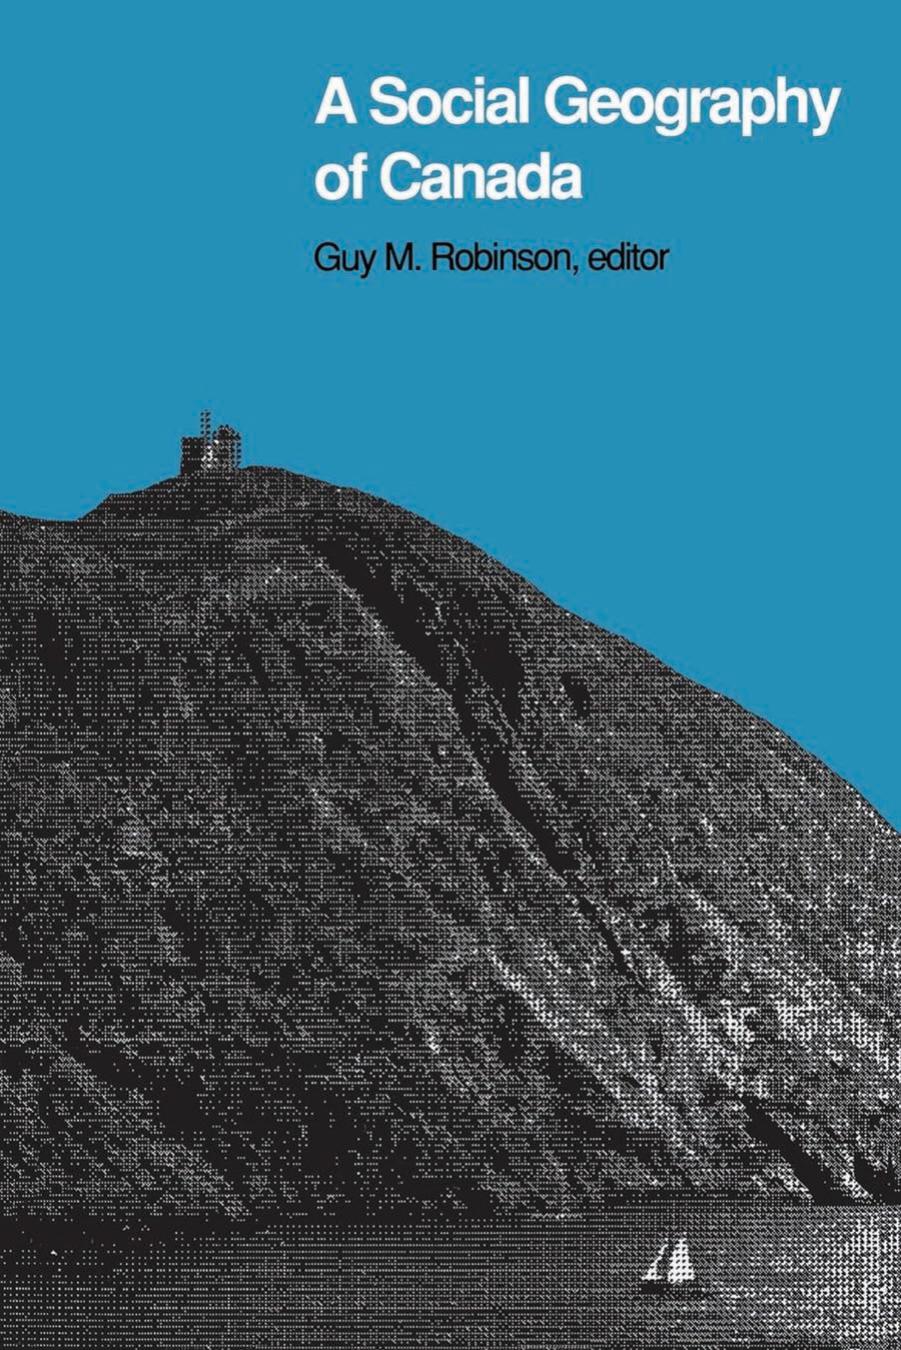 A Social Geography of Canada by Guy M. Robinson